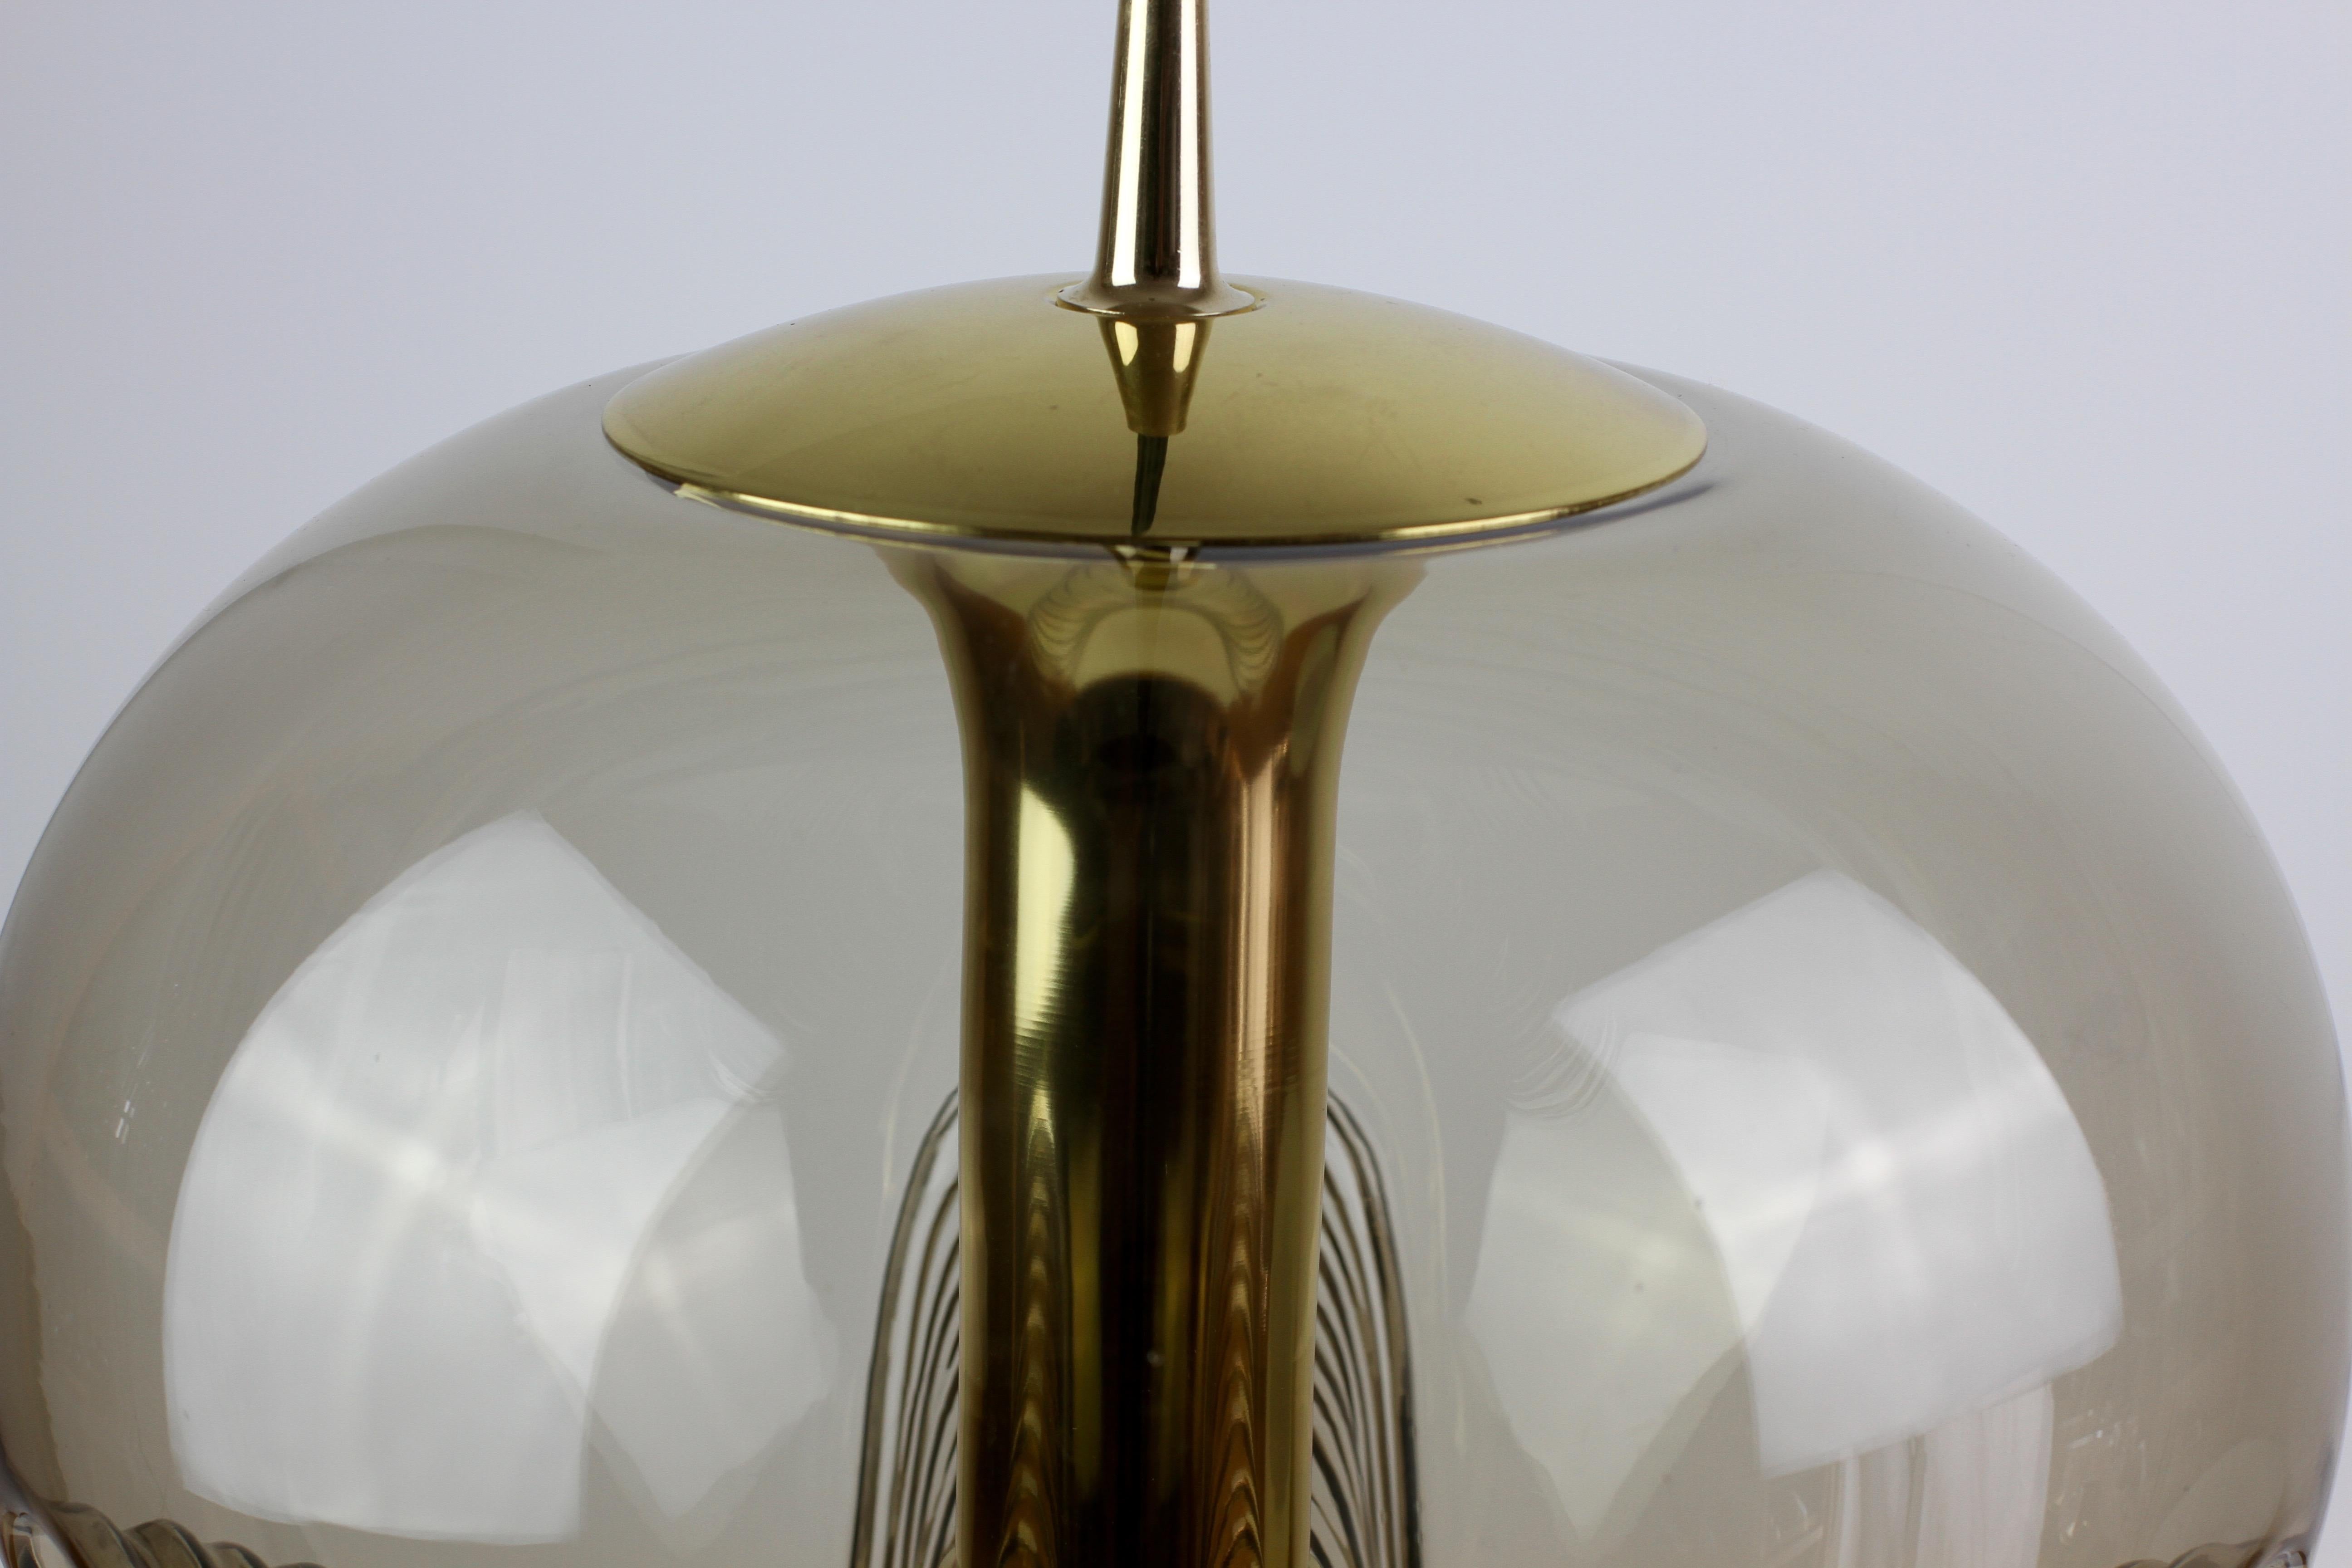 1 of 2 Peill & Putzler Large Biomorphic Hanging Pendant Lights Lamps, C. 1975 For Sale 1